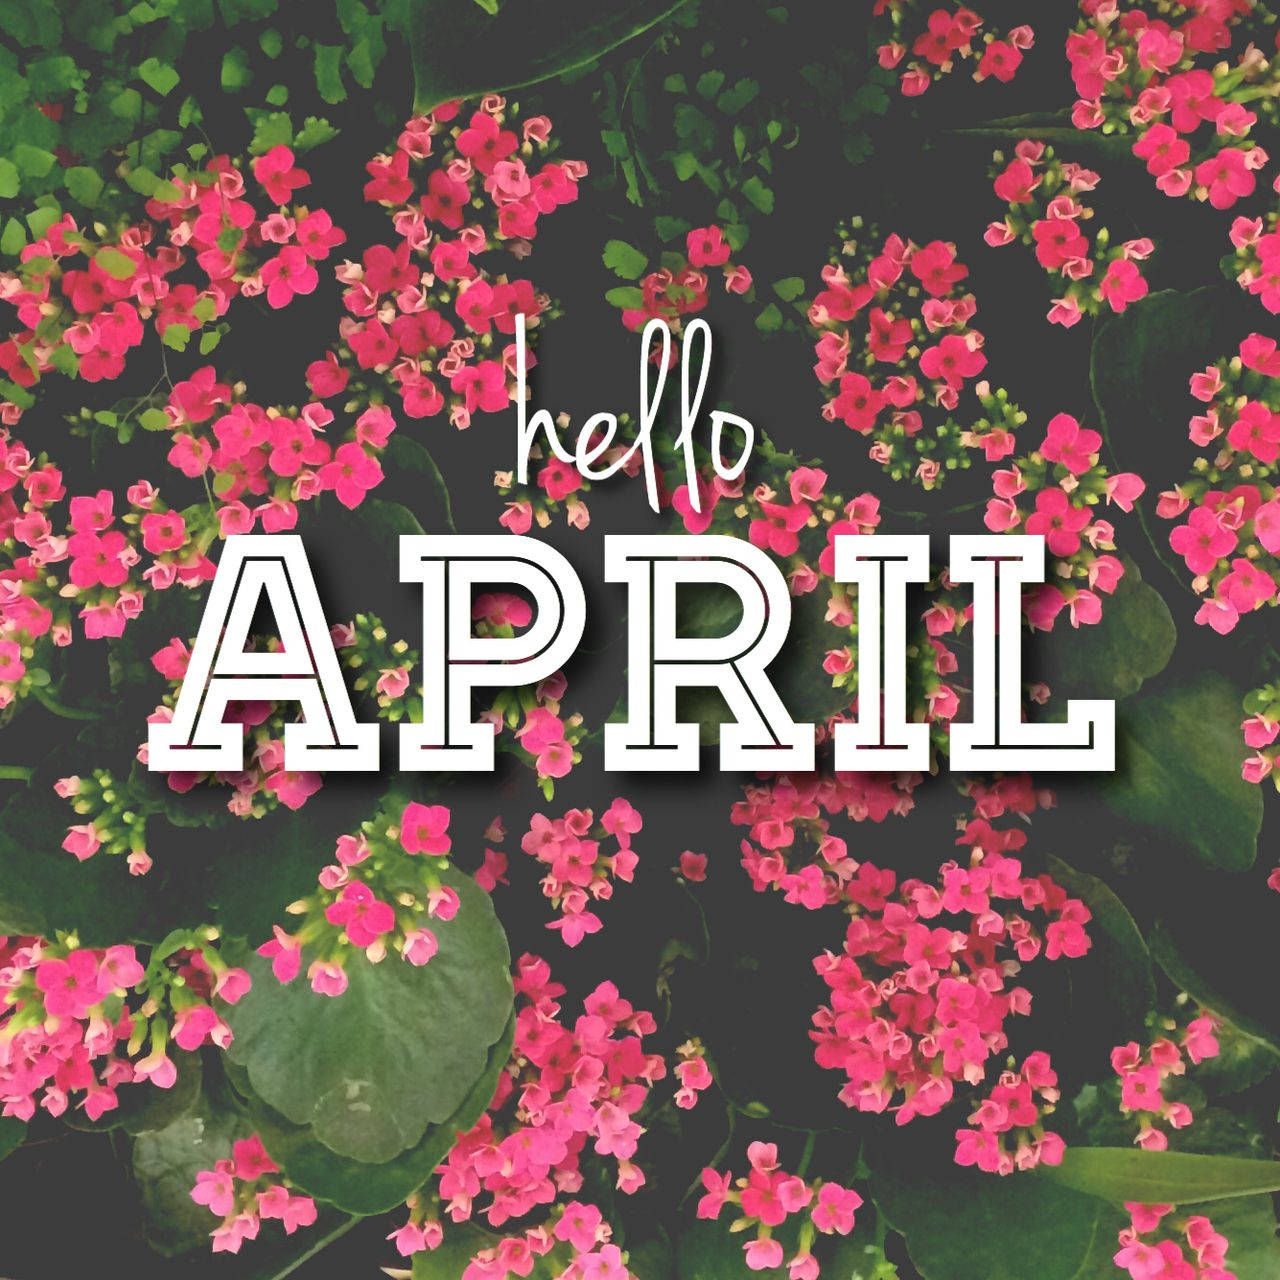 Welcome April With Gorgeous Blooms!